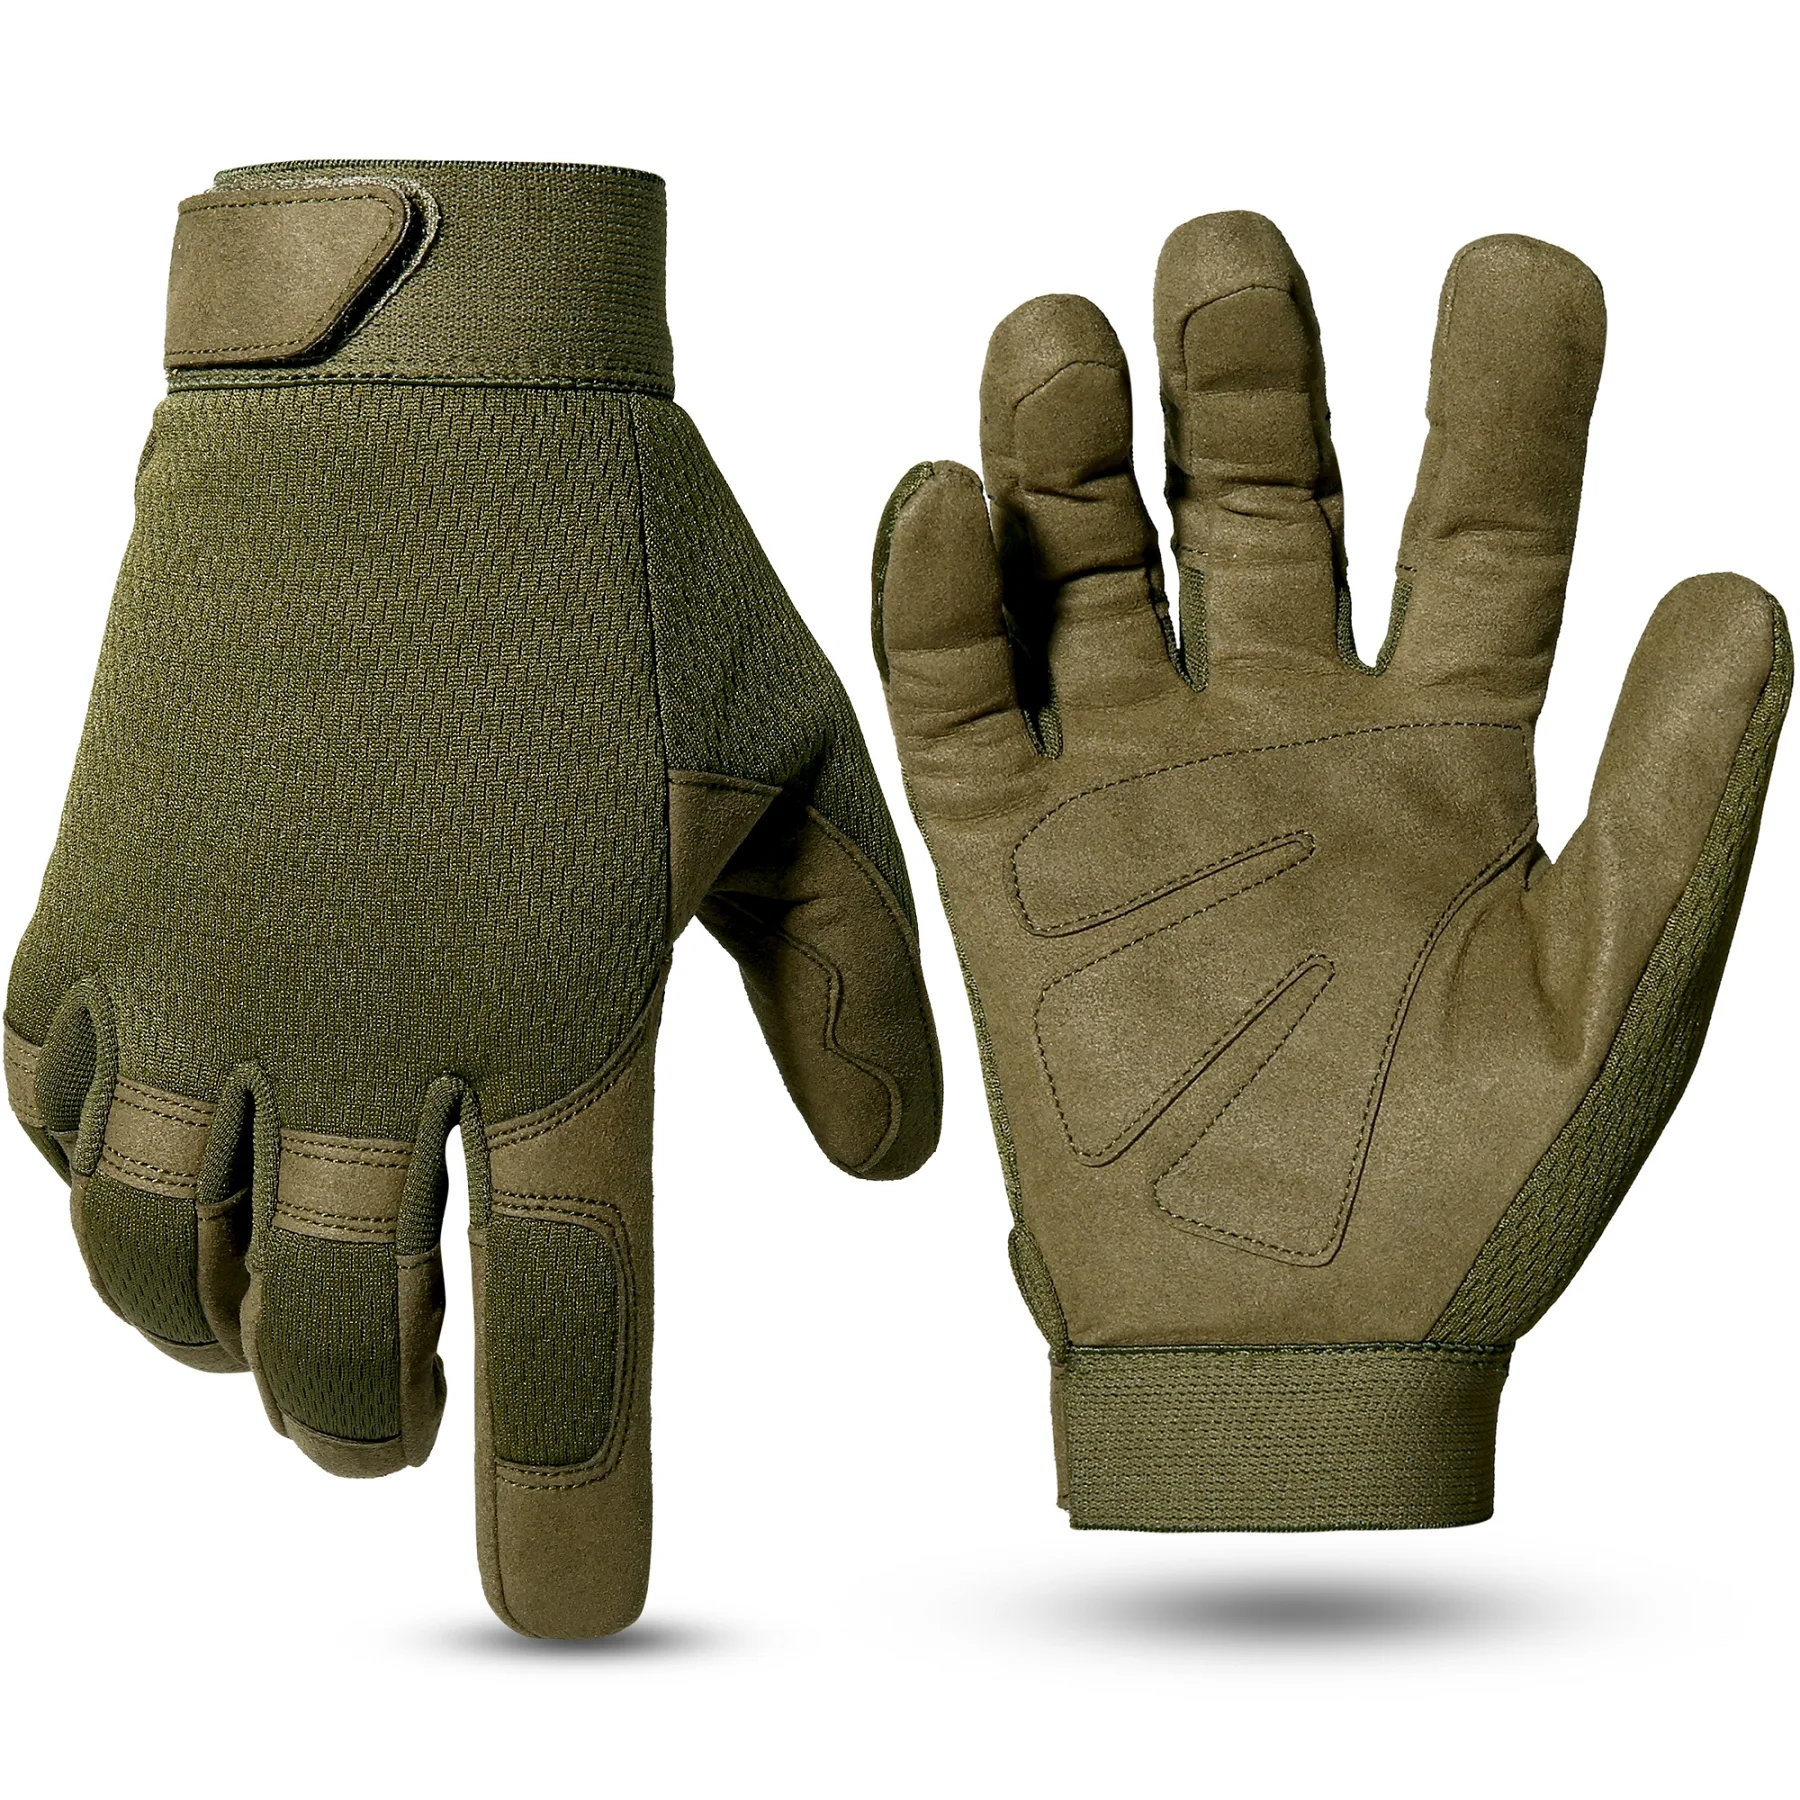 Details about   Outdoor Tactical Gloves Army Military Bicycle Climbing Hunting Full Finger Glove 